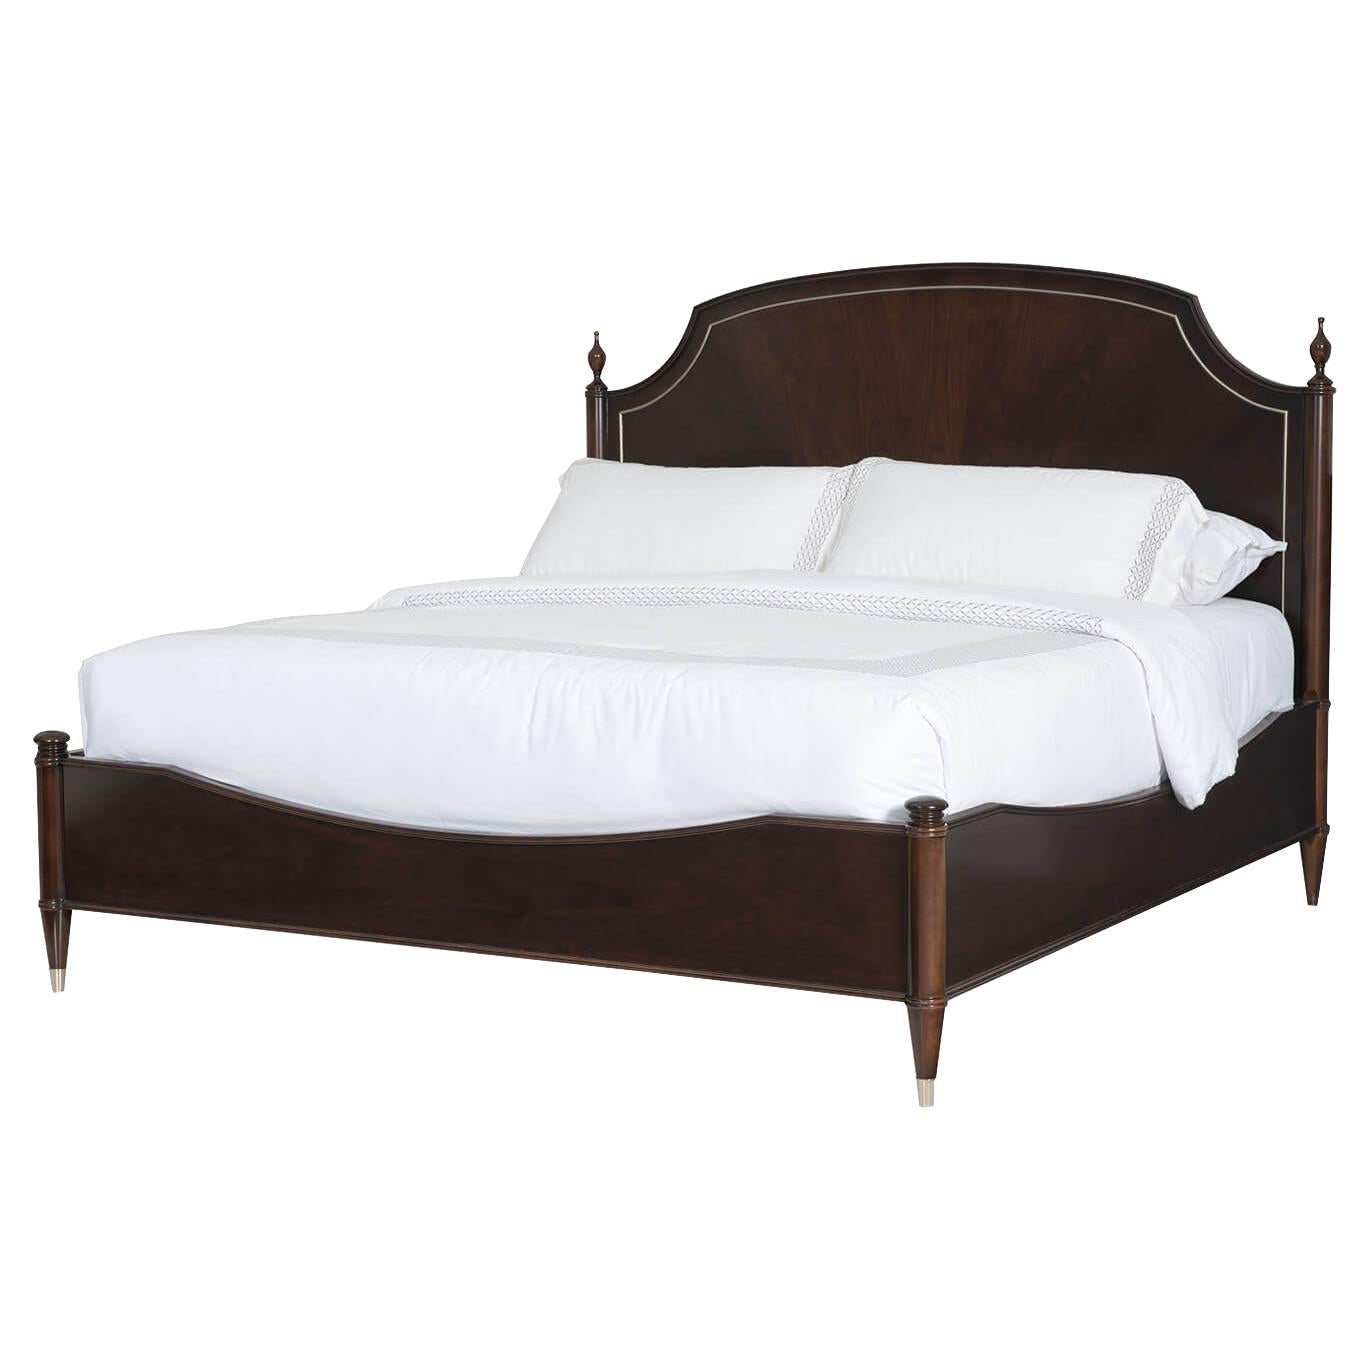 European Style King Bed